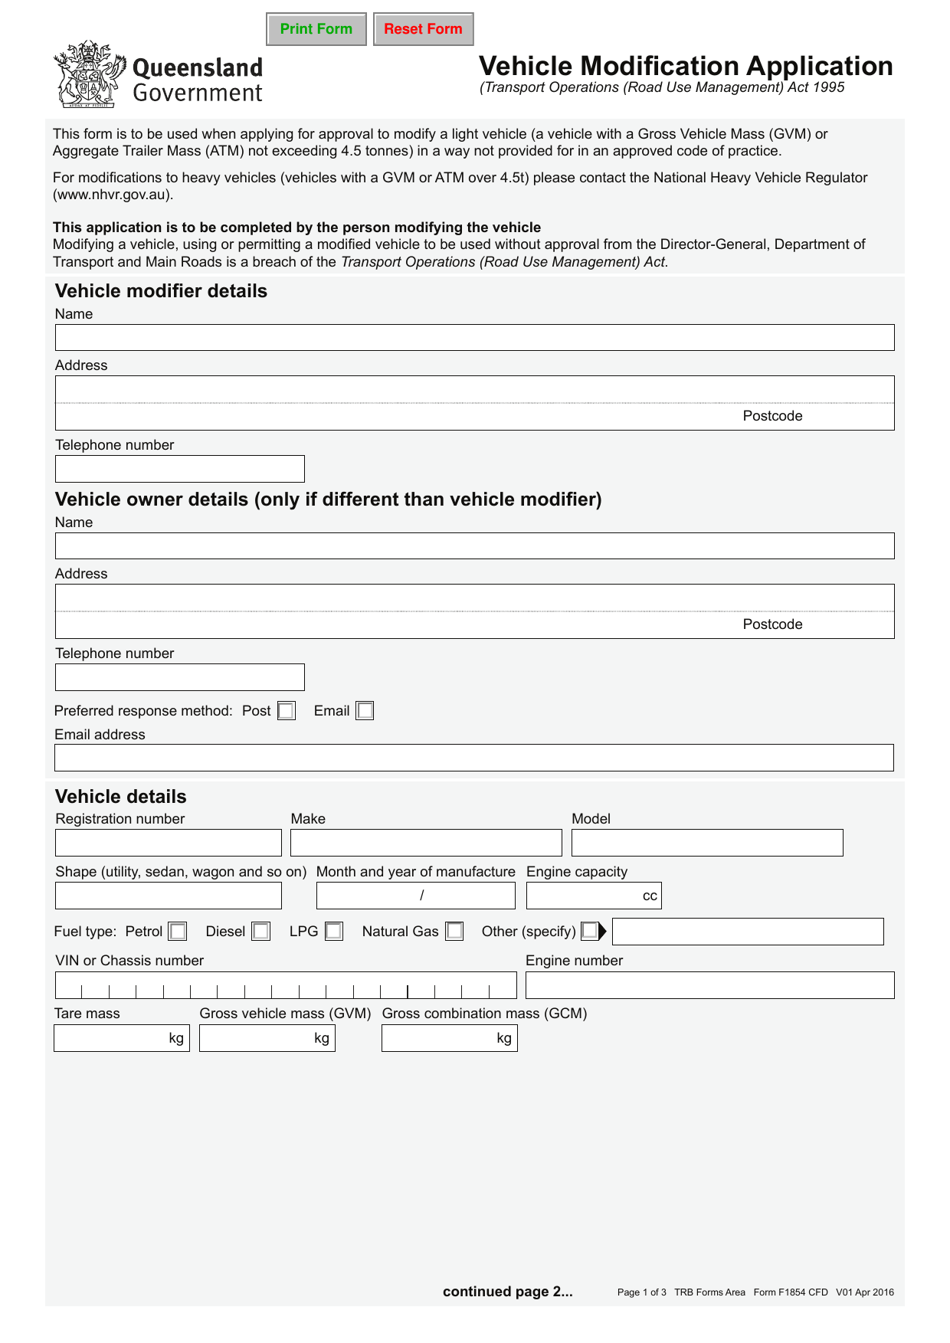 Form F1854 Vehicle Modification Application - Queensland, Australia, Page 1